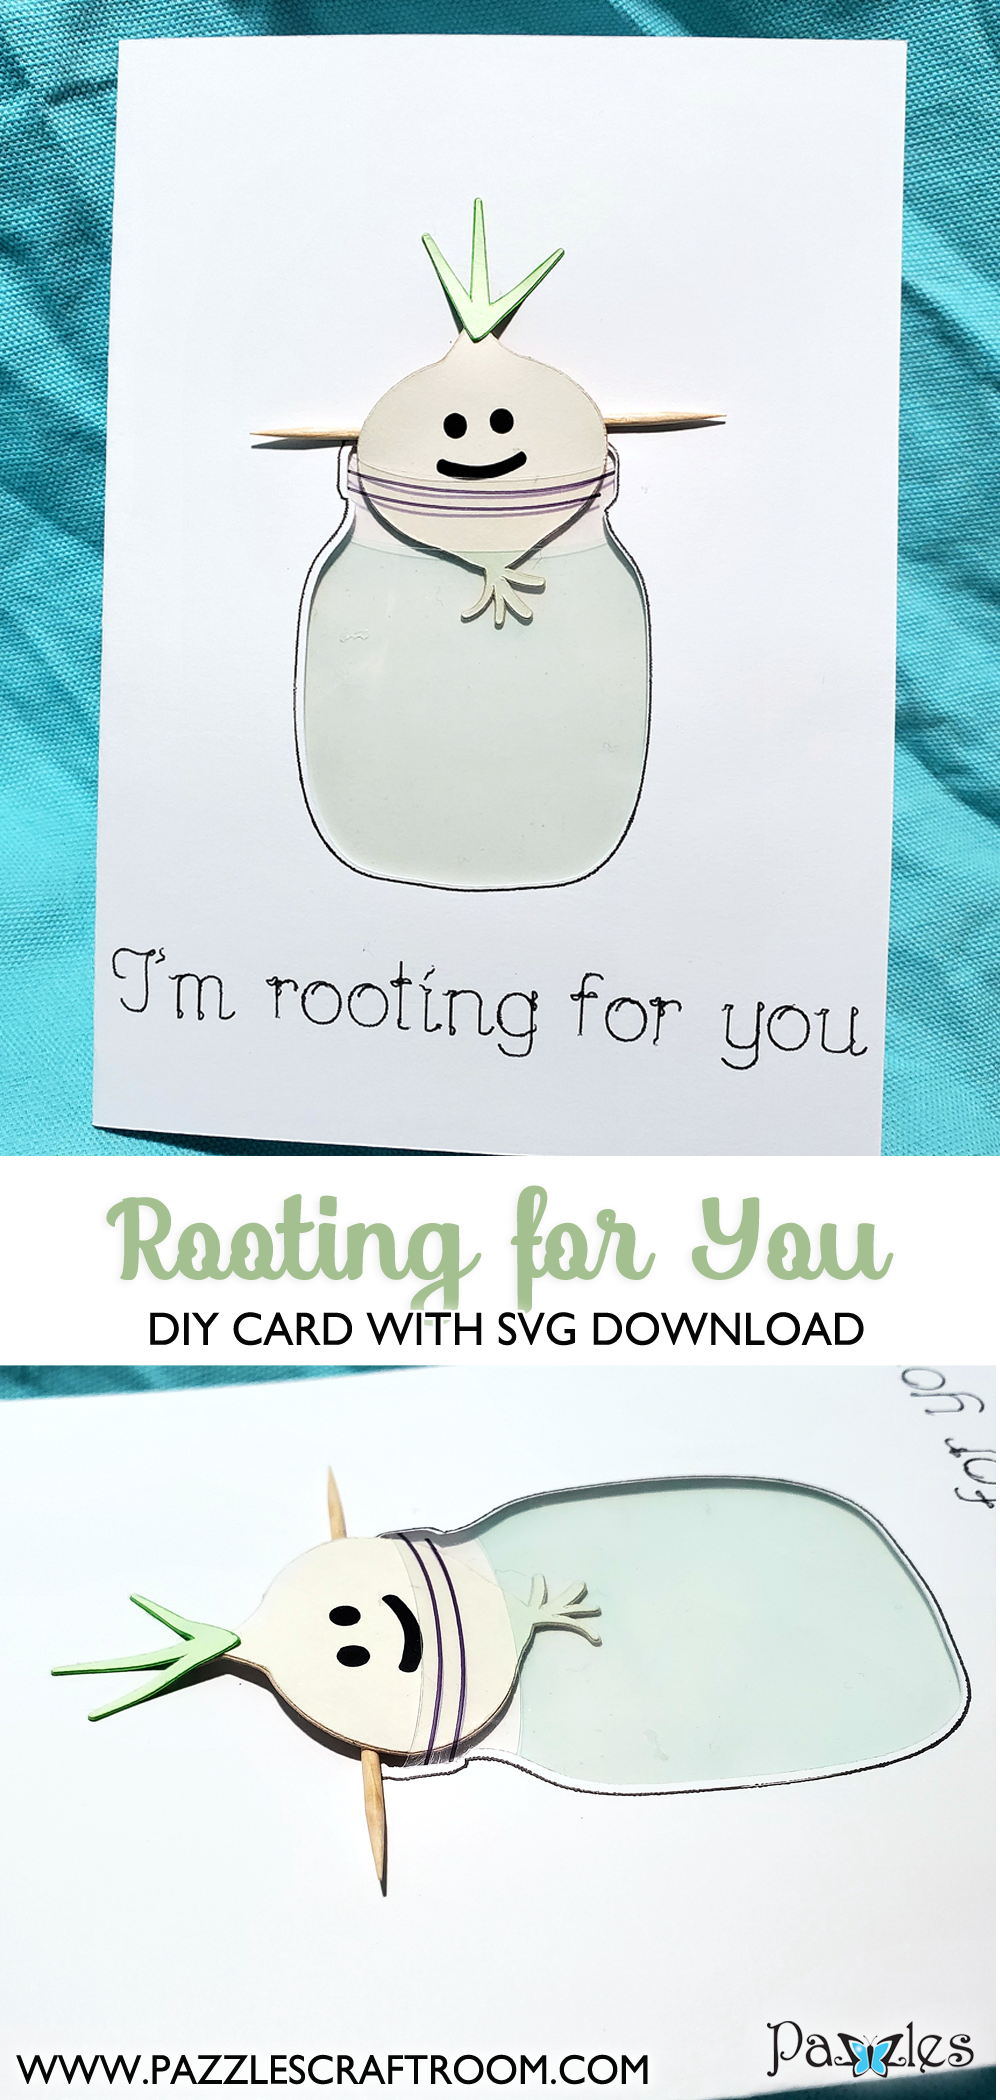 Pazzles DIY Rooting for You Card with instant SVG download. Design by Renee Smart.